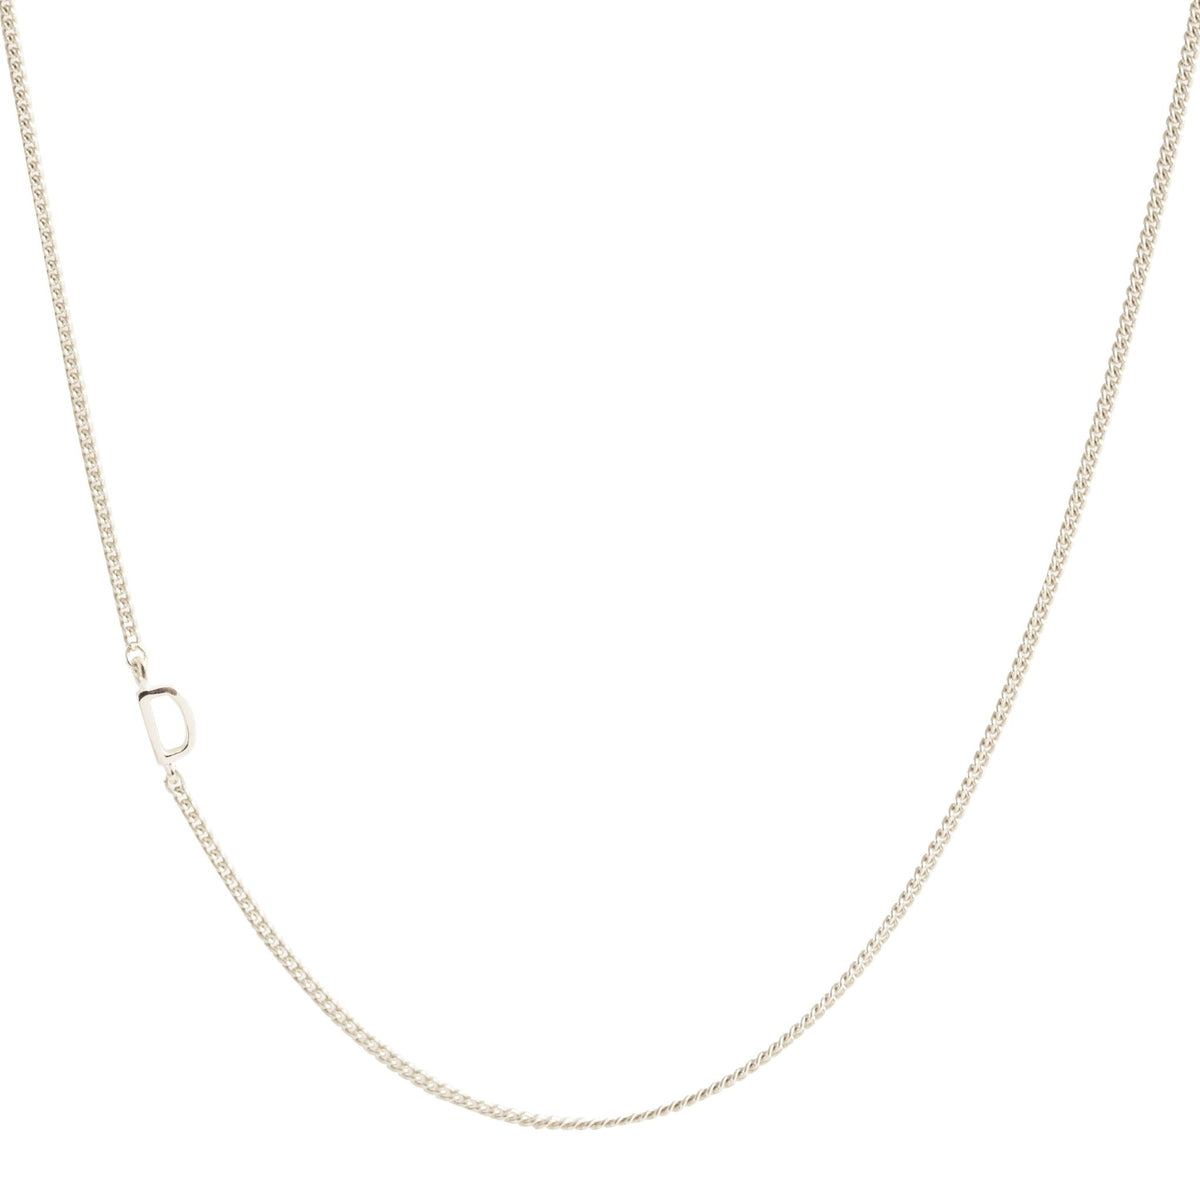 NOTABLE OFFSET INITIAL NECKLACE - D - GOLD, ROSE GOLD, OR SILVER - SO PRETTY CARA COTTER